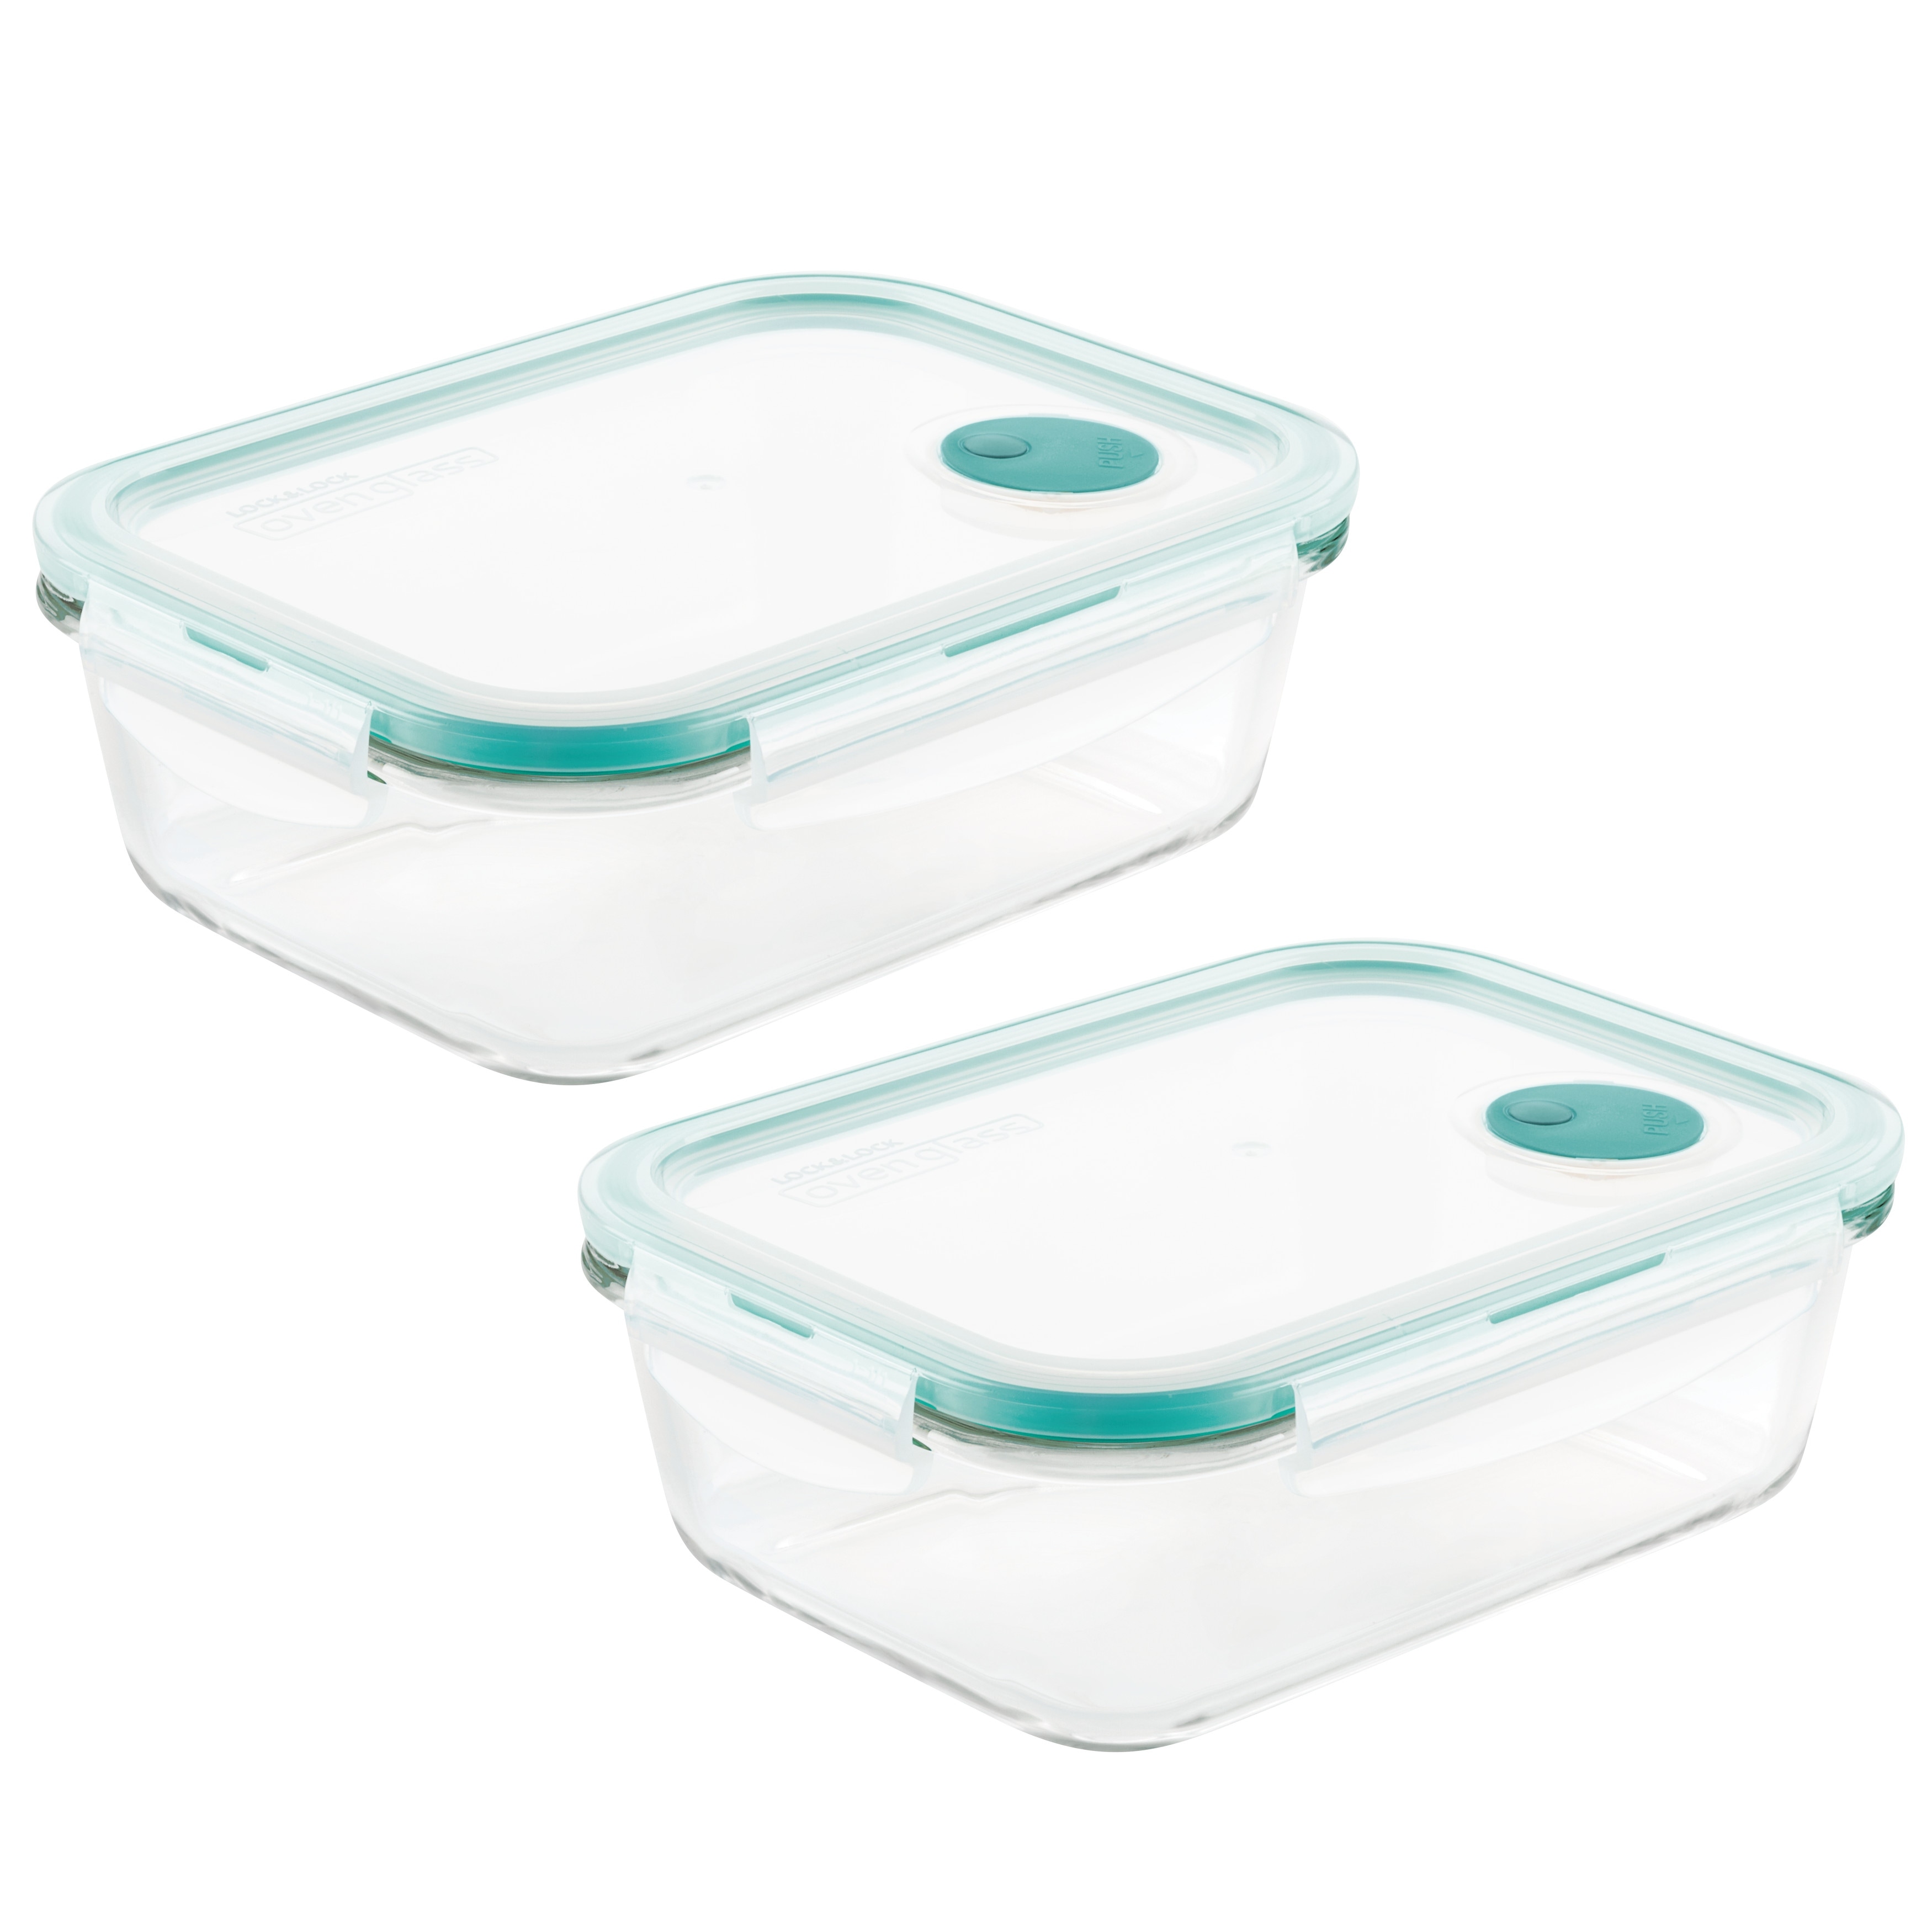 https://ak1.ostkcdn.com/images/products/is/images/direct/9bf318ebfdda6b687d25908e5608ff223be1d15f/LocknLock-Purely-Better-Vented-Glass-Food-Storage-Containers%2C-34-Ounce%2C-Set-of-Two.jpg